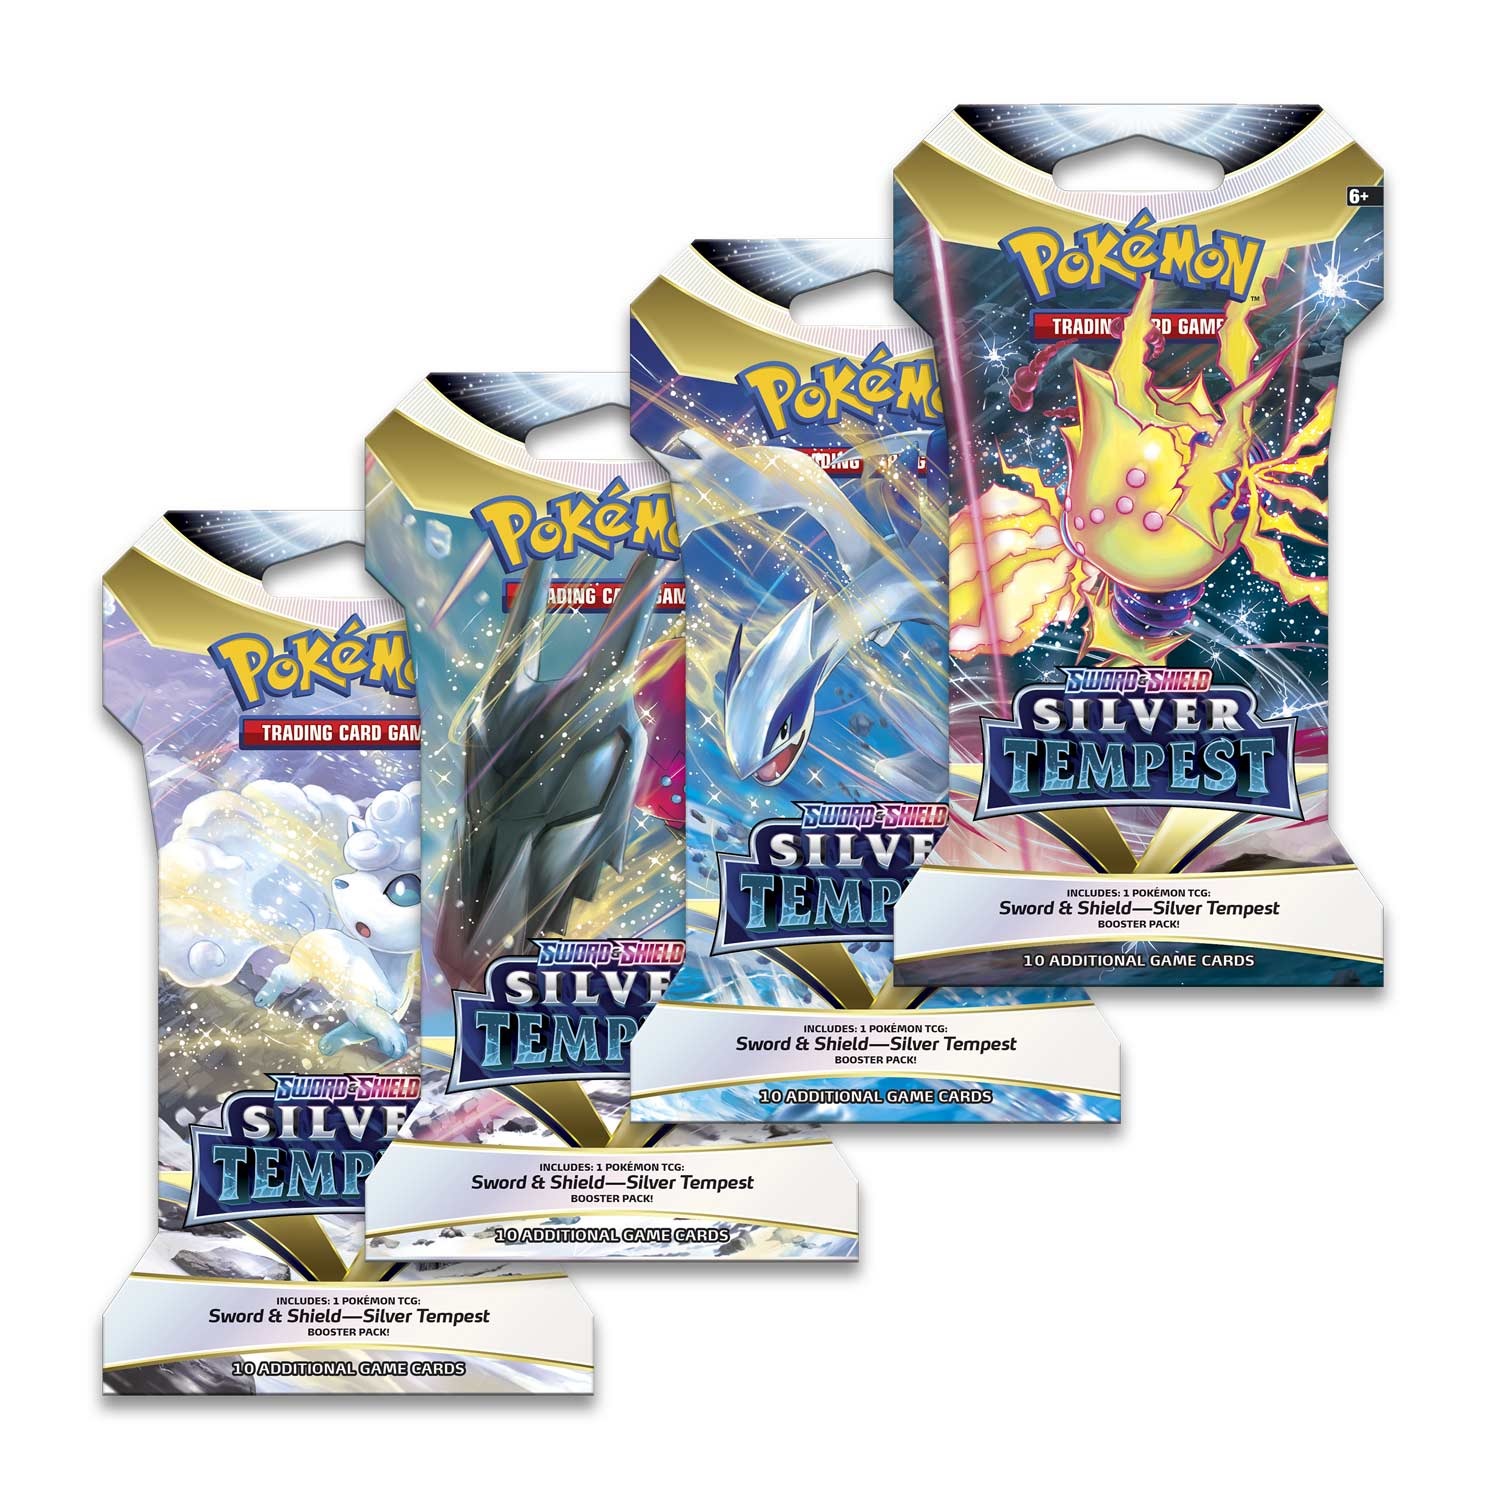 Sword and Shield - Silver Tempest Booster Pack Artwork Set